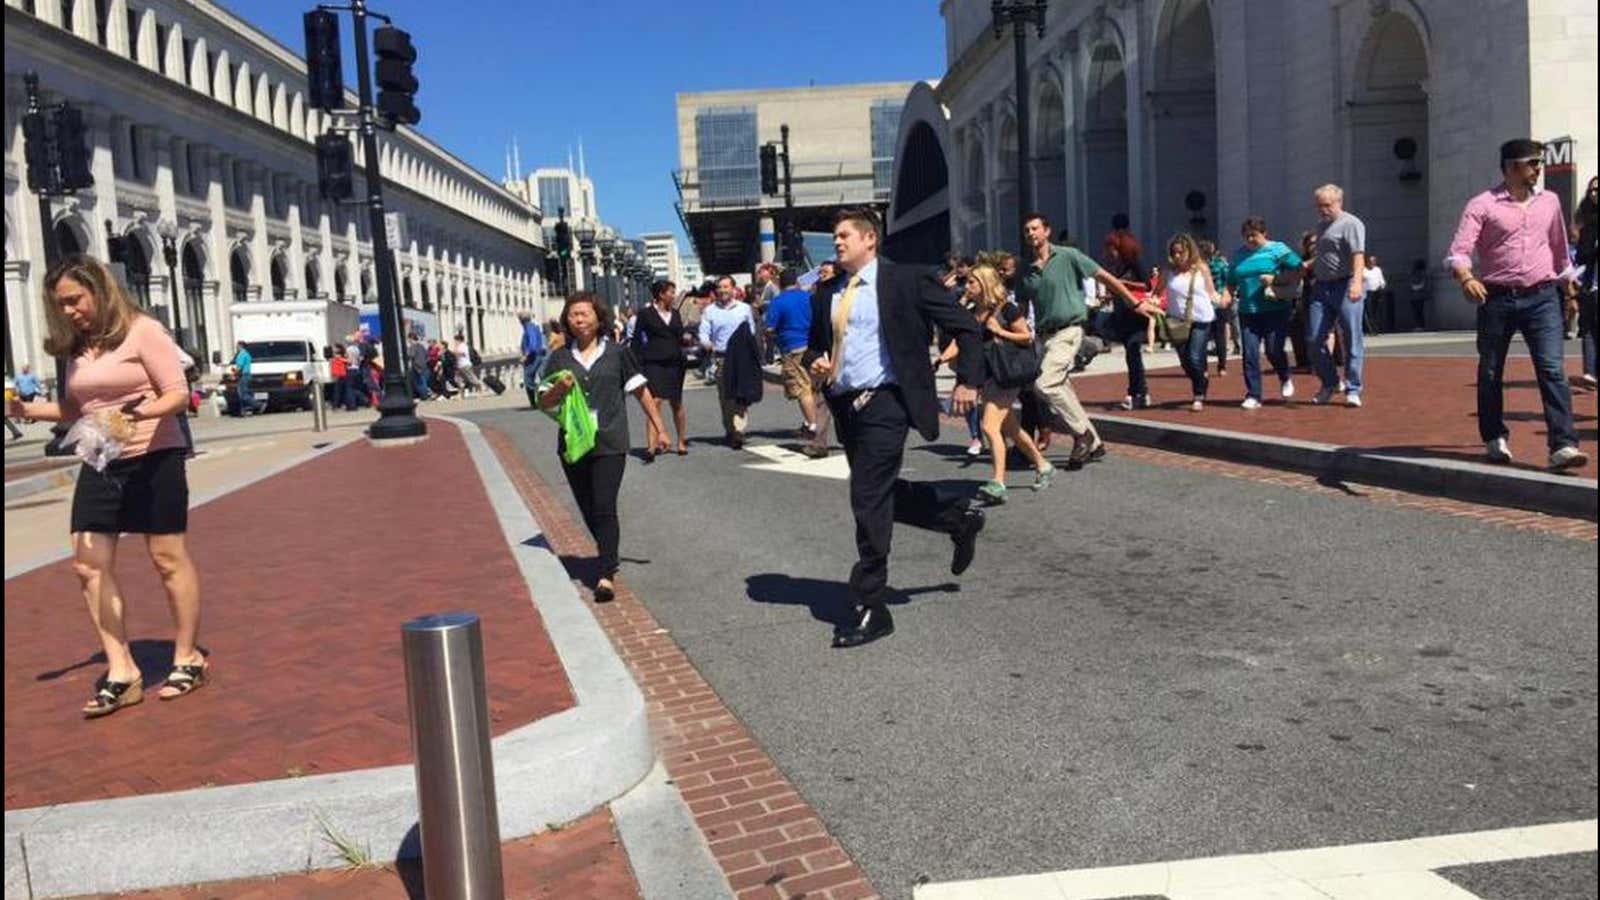 Washington DC’s Union Station is evacuated after a shooting